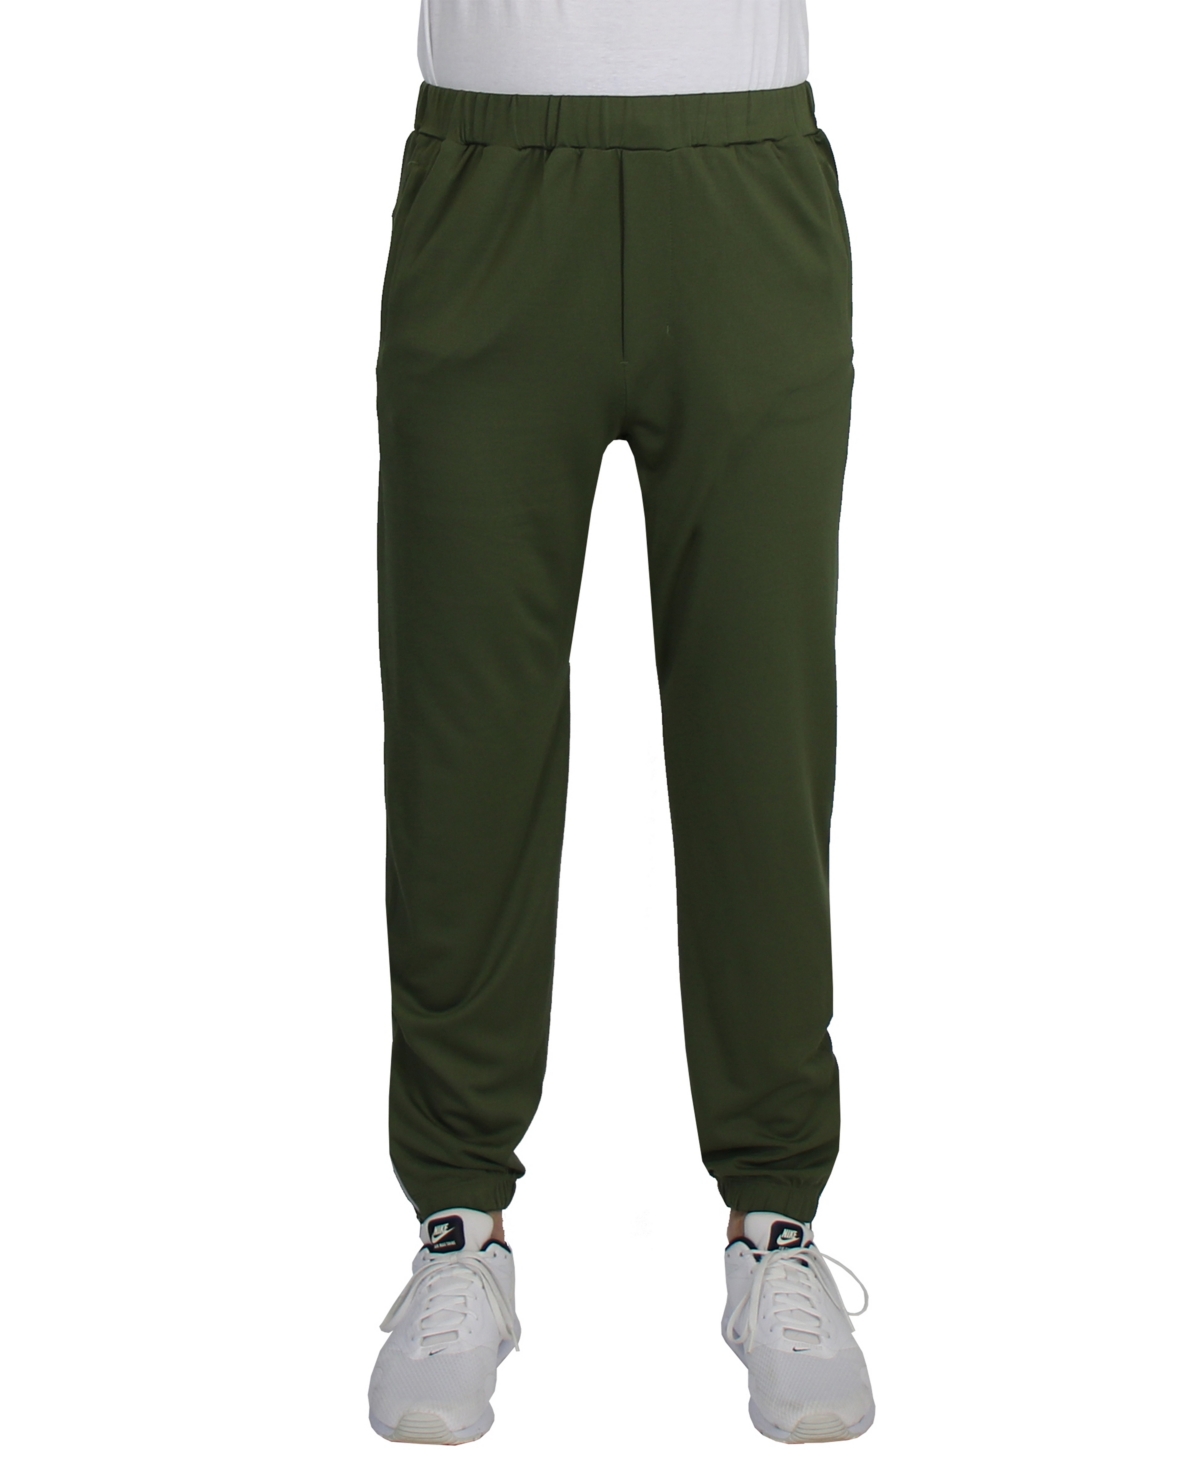 Blue Ice Men's Moisture Wicking Performance Joggers With Reflective Trim Ankle Zippers In Olive